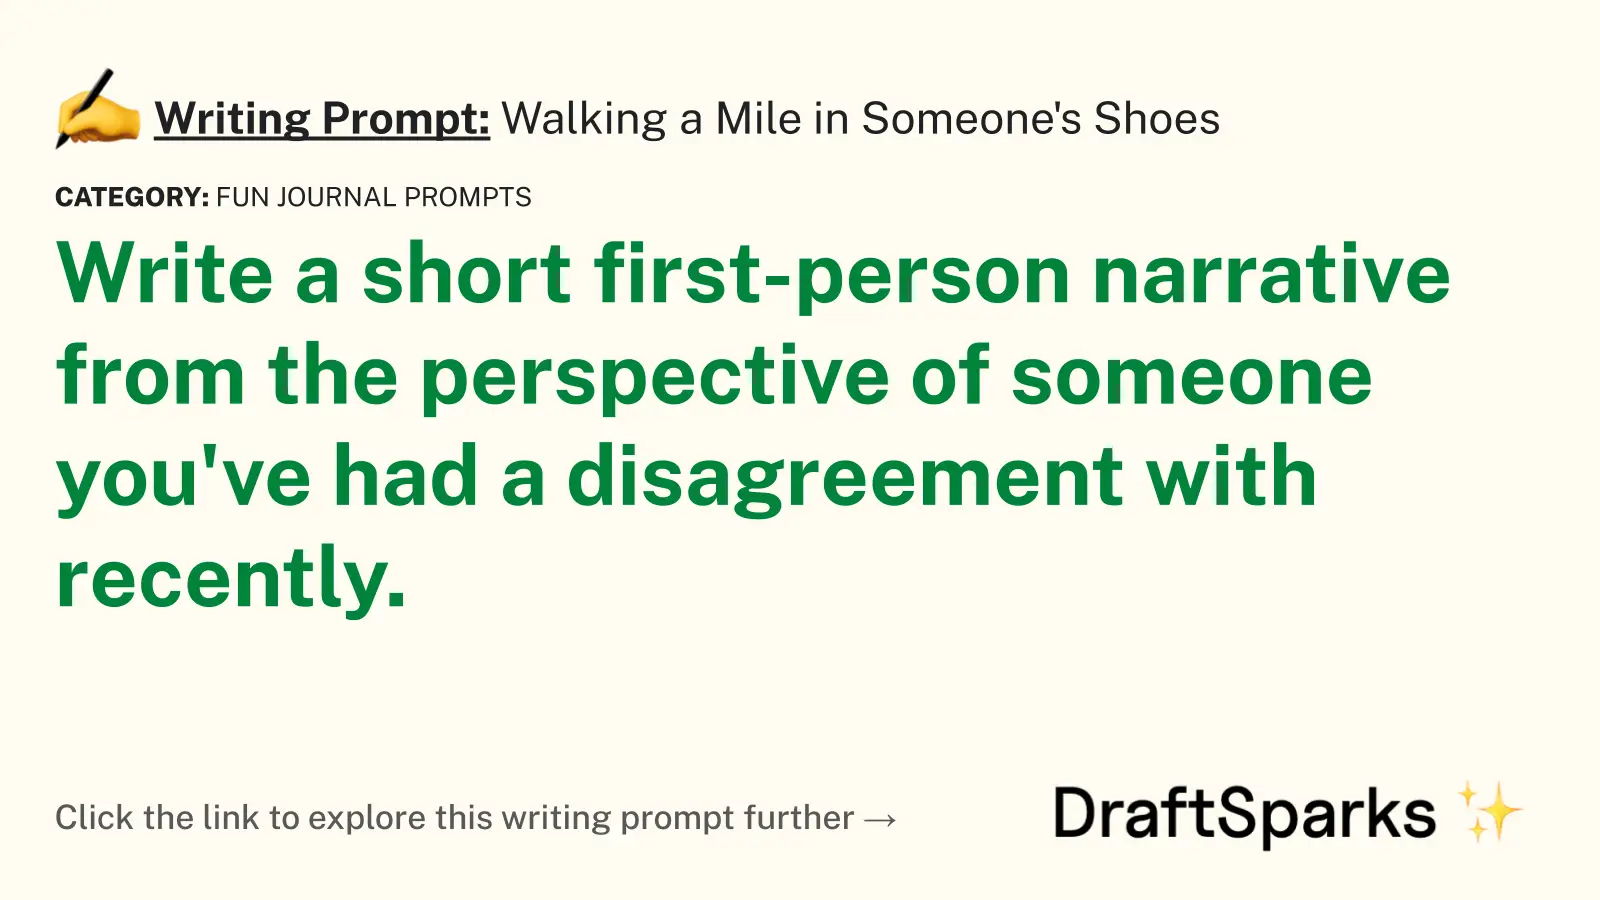 Walking a Mile in Someone’s Shoes